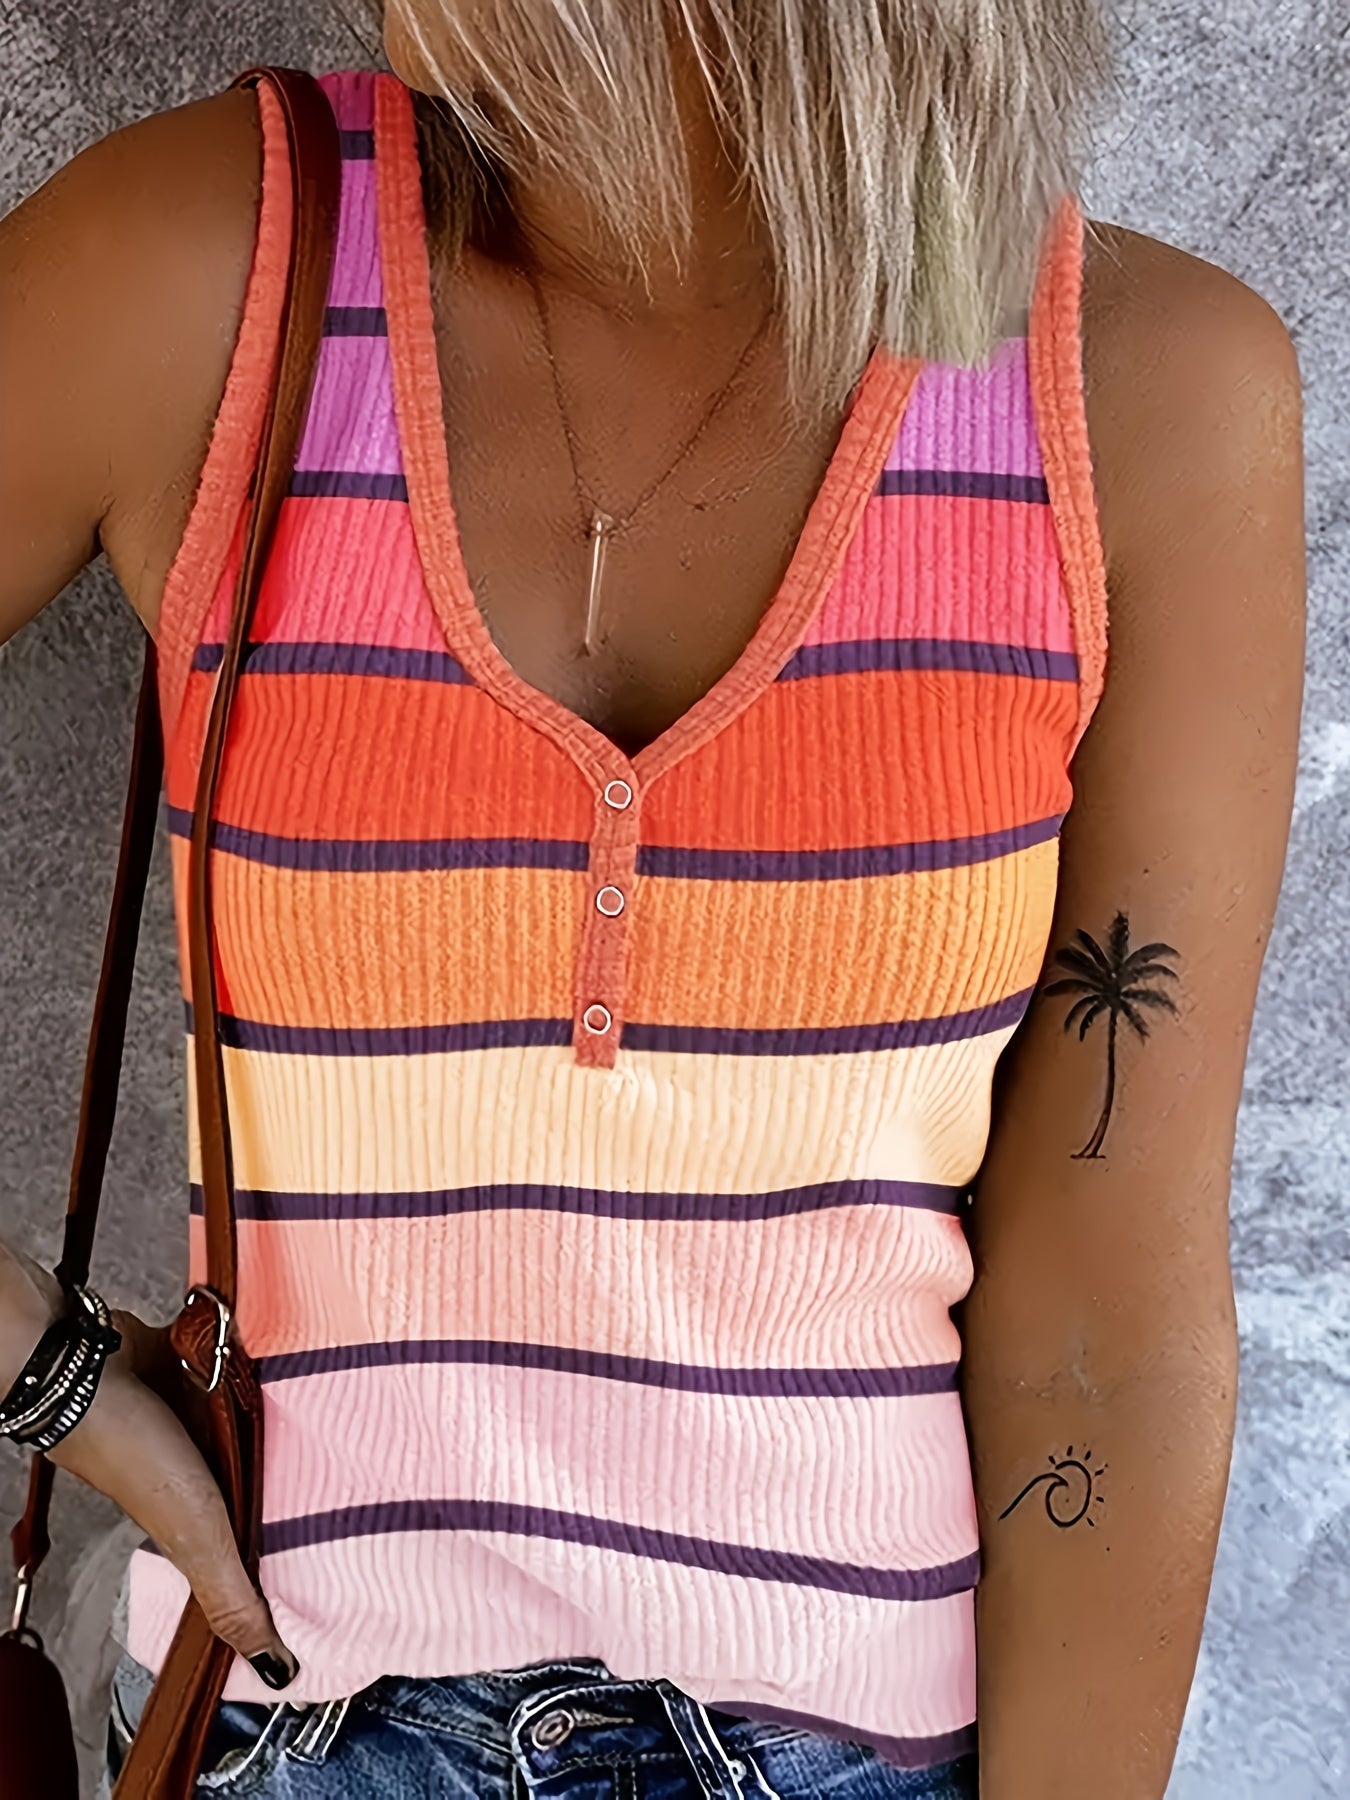 「lovevop」Striped Tank Top, Sleeveless Casual Every Day Top For Summer & Spring, Women's Clothing